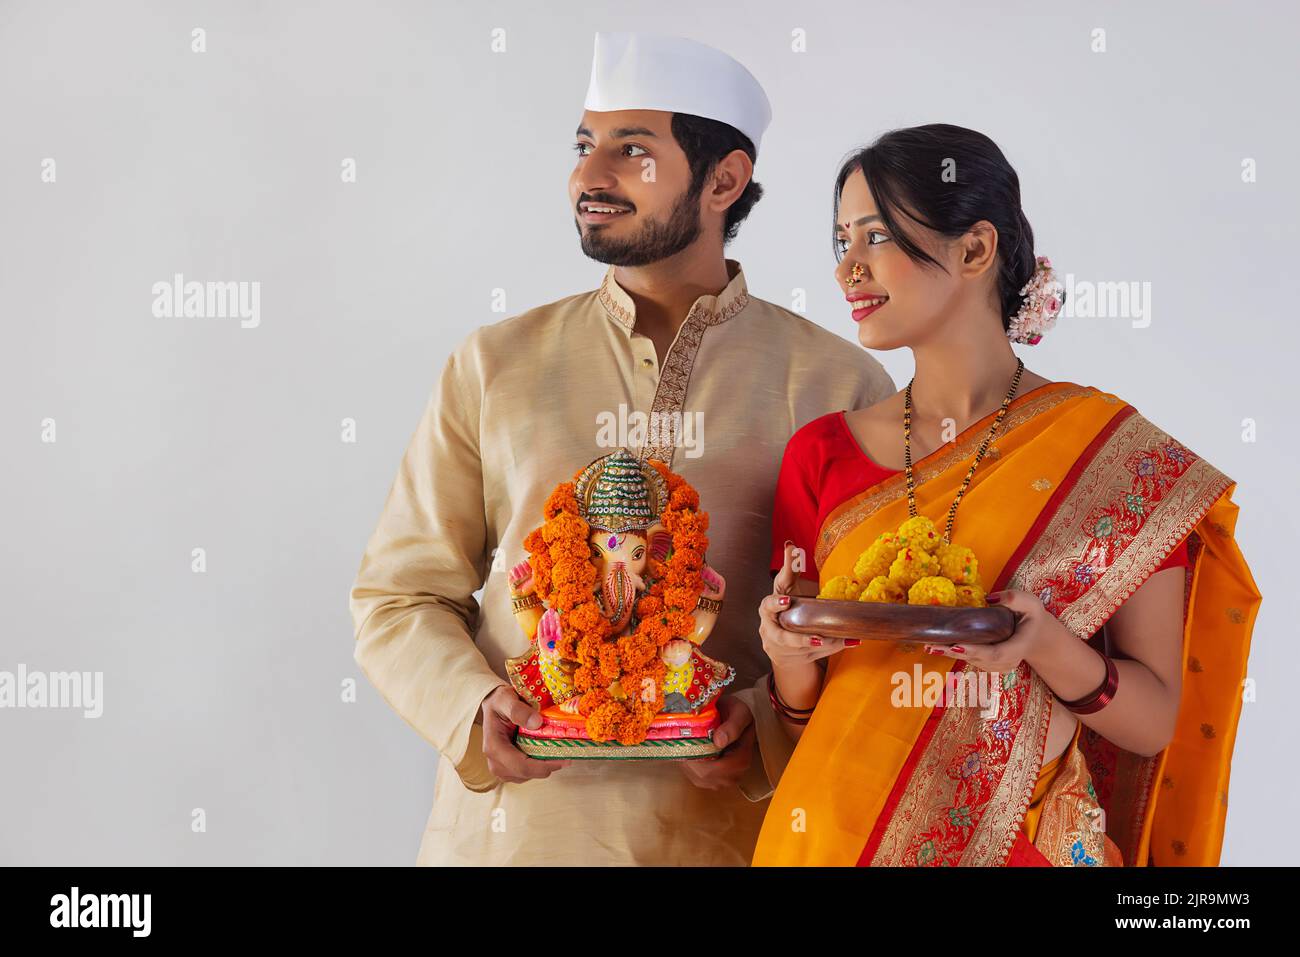 Maharashtrian couple carrying statue of Lord Ganesh and plate of sweet food Stock Photo